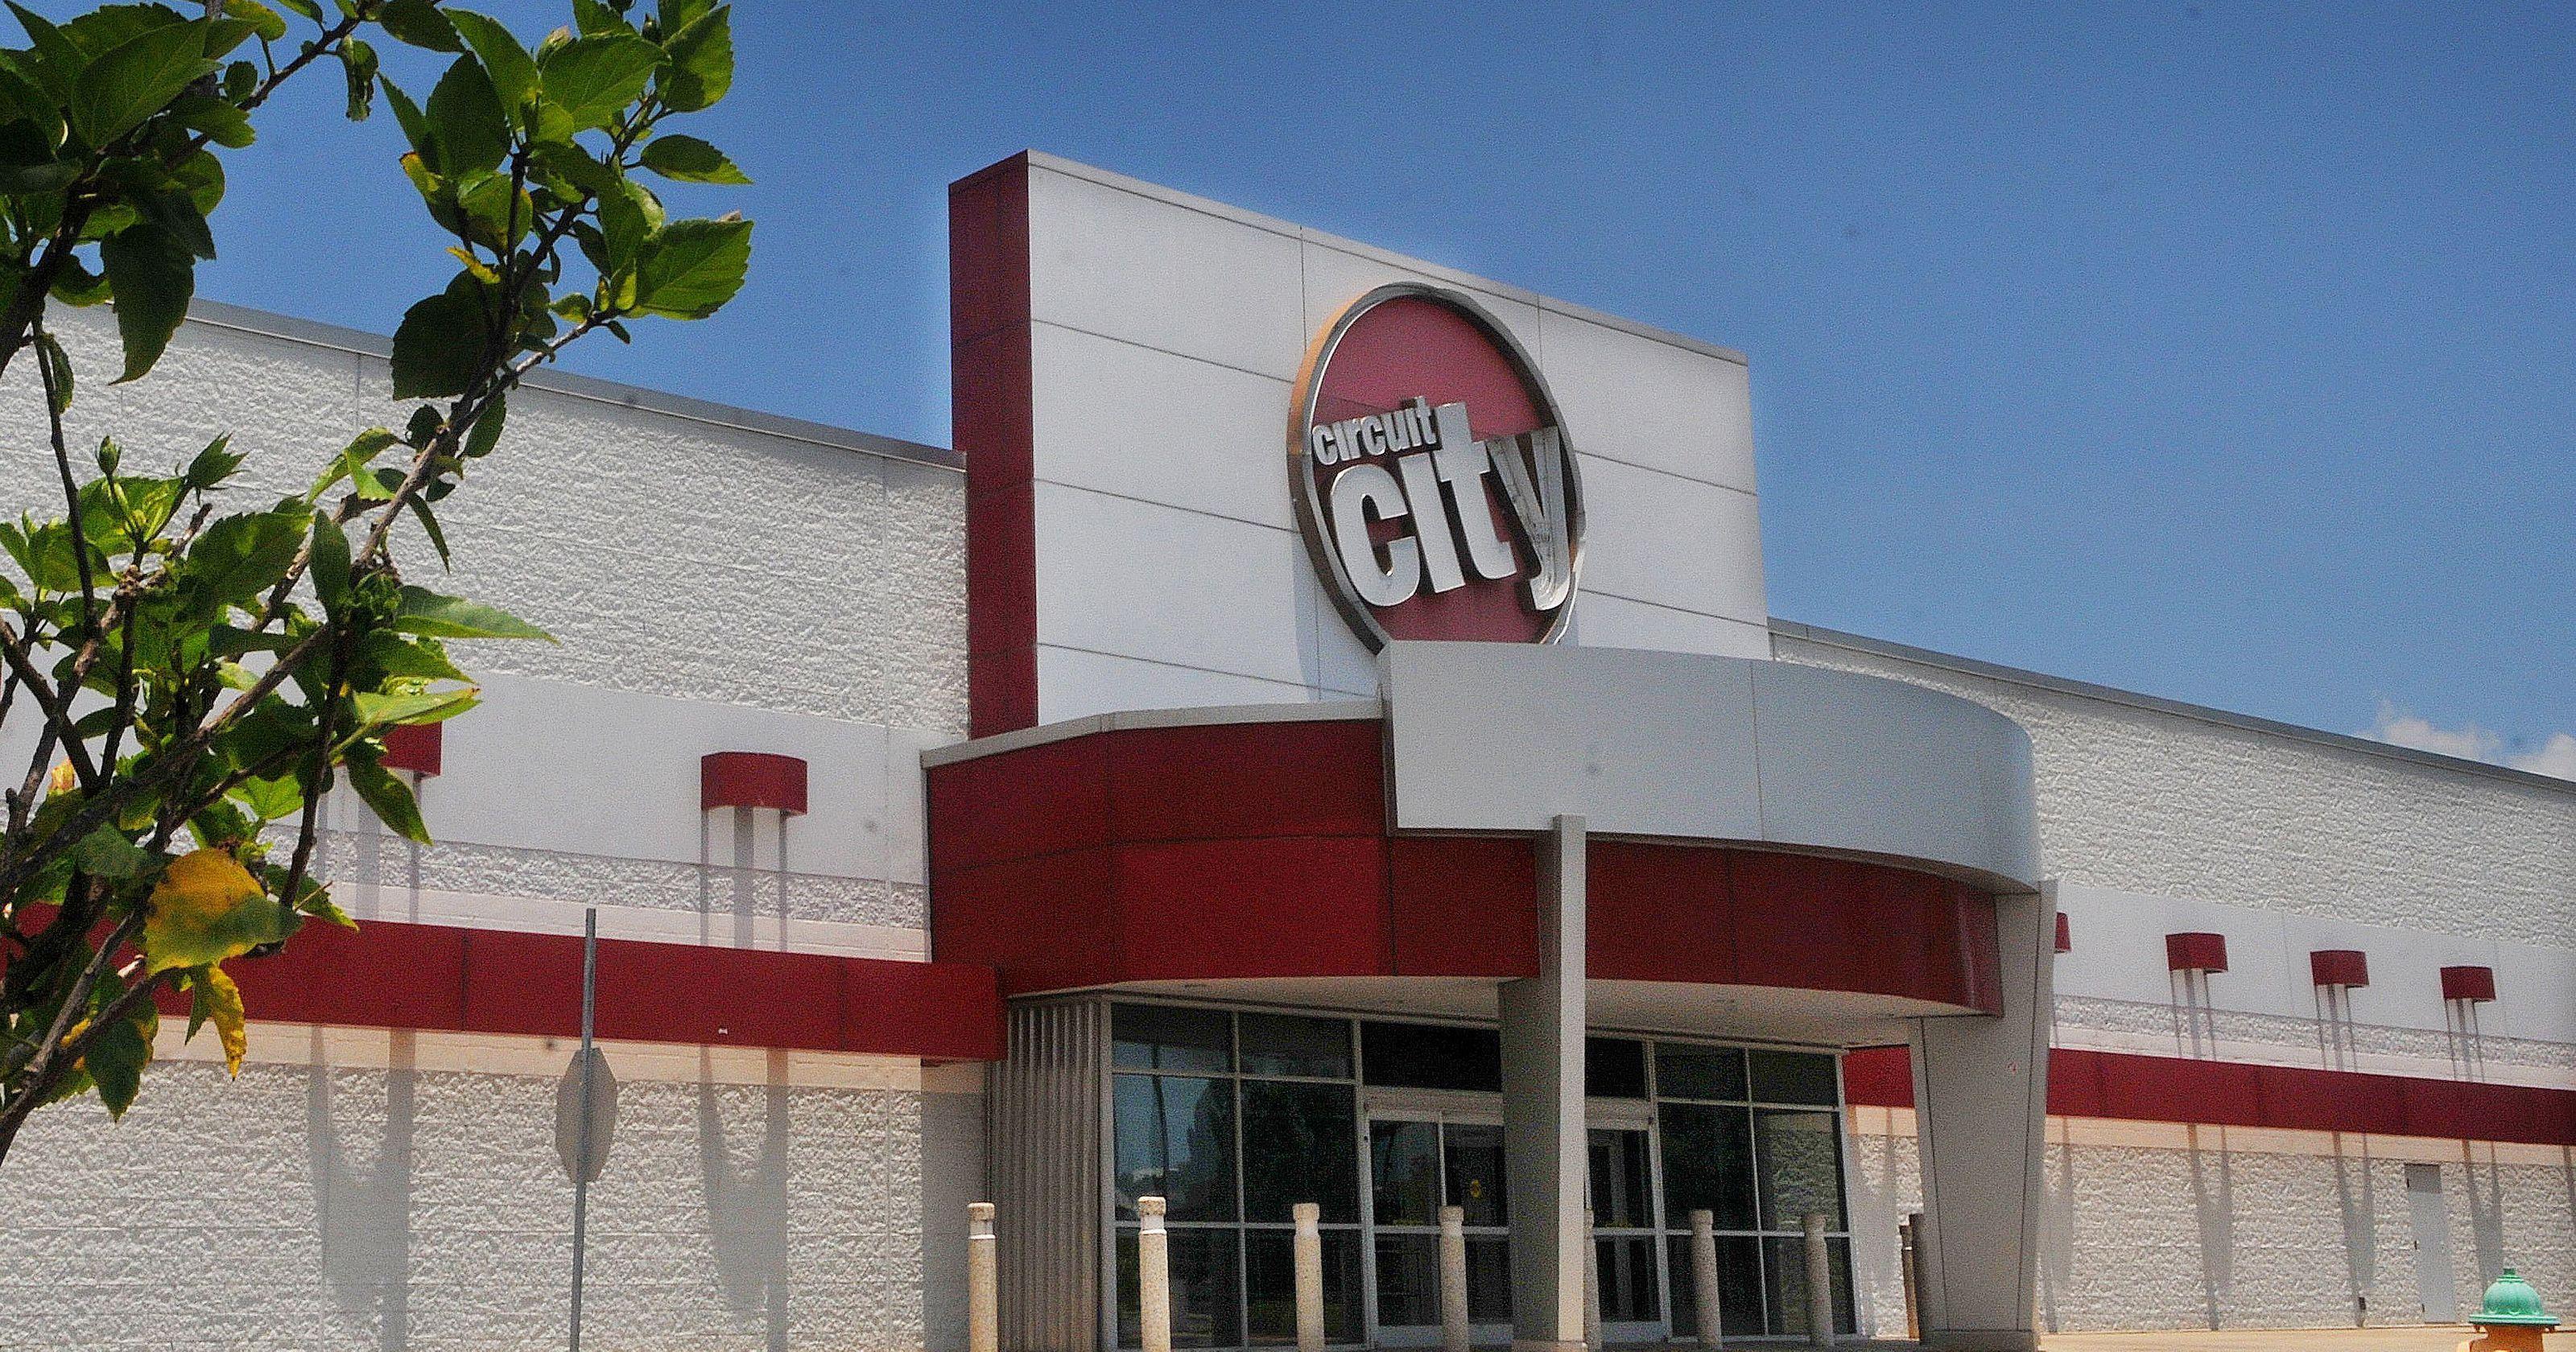 Old Circuit City Logo - Call center moving into old Merritt Island Circuit City